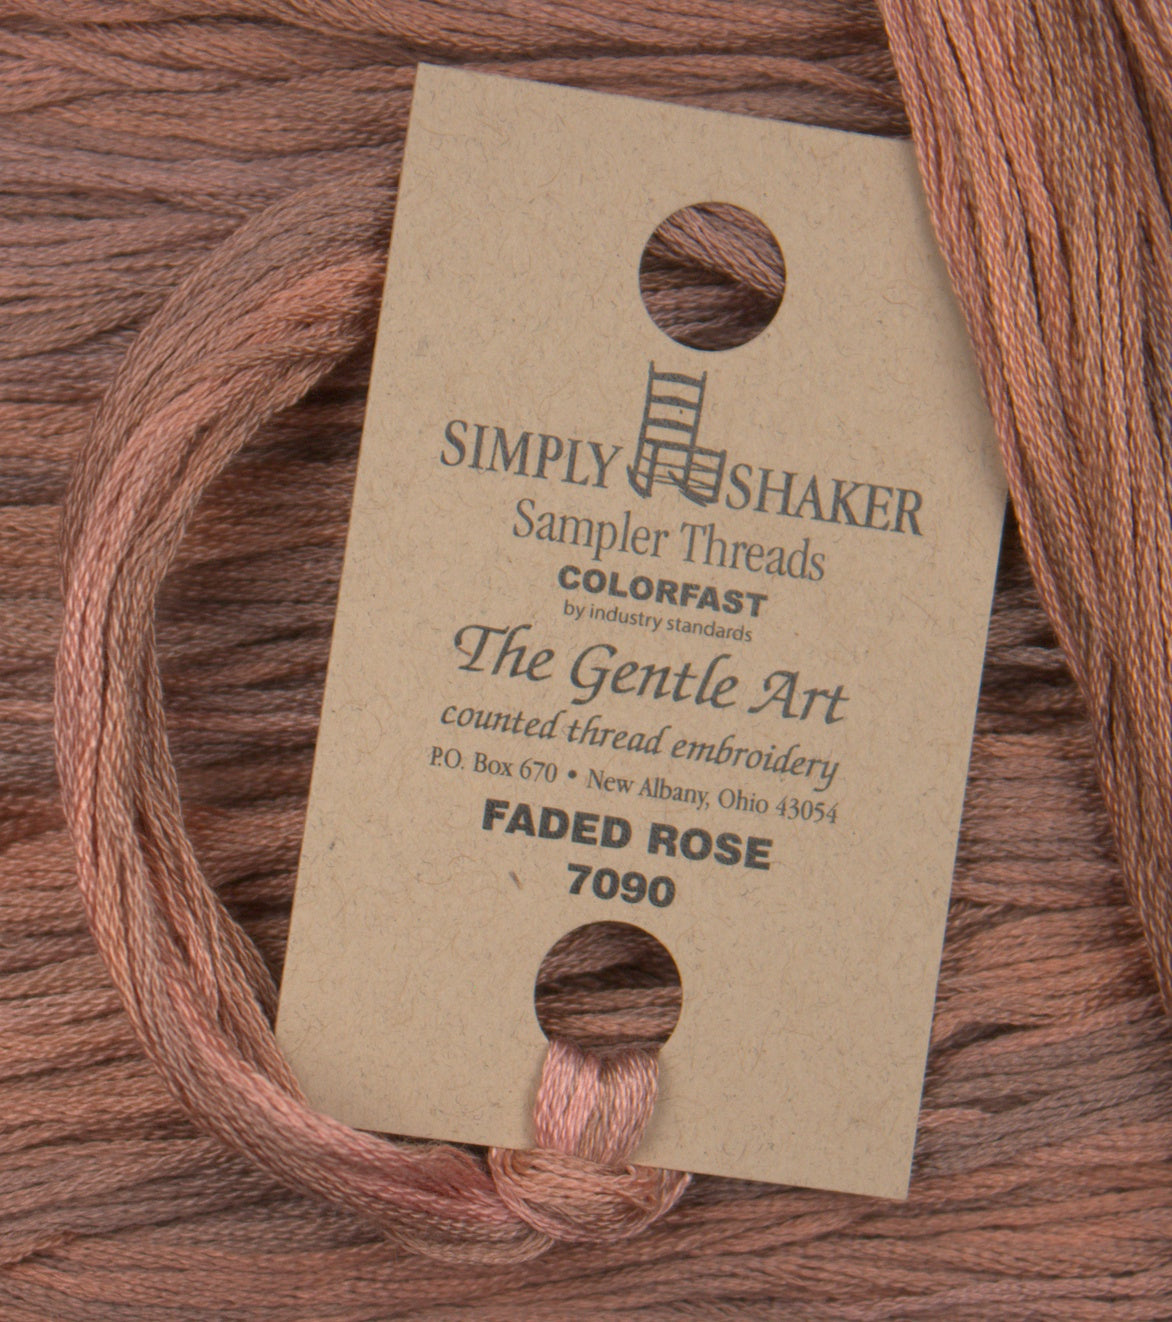 Faded Rose 7090